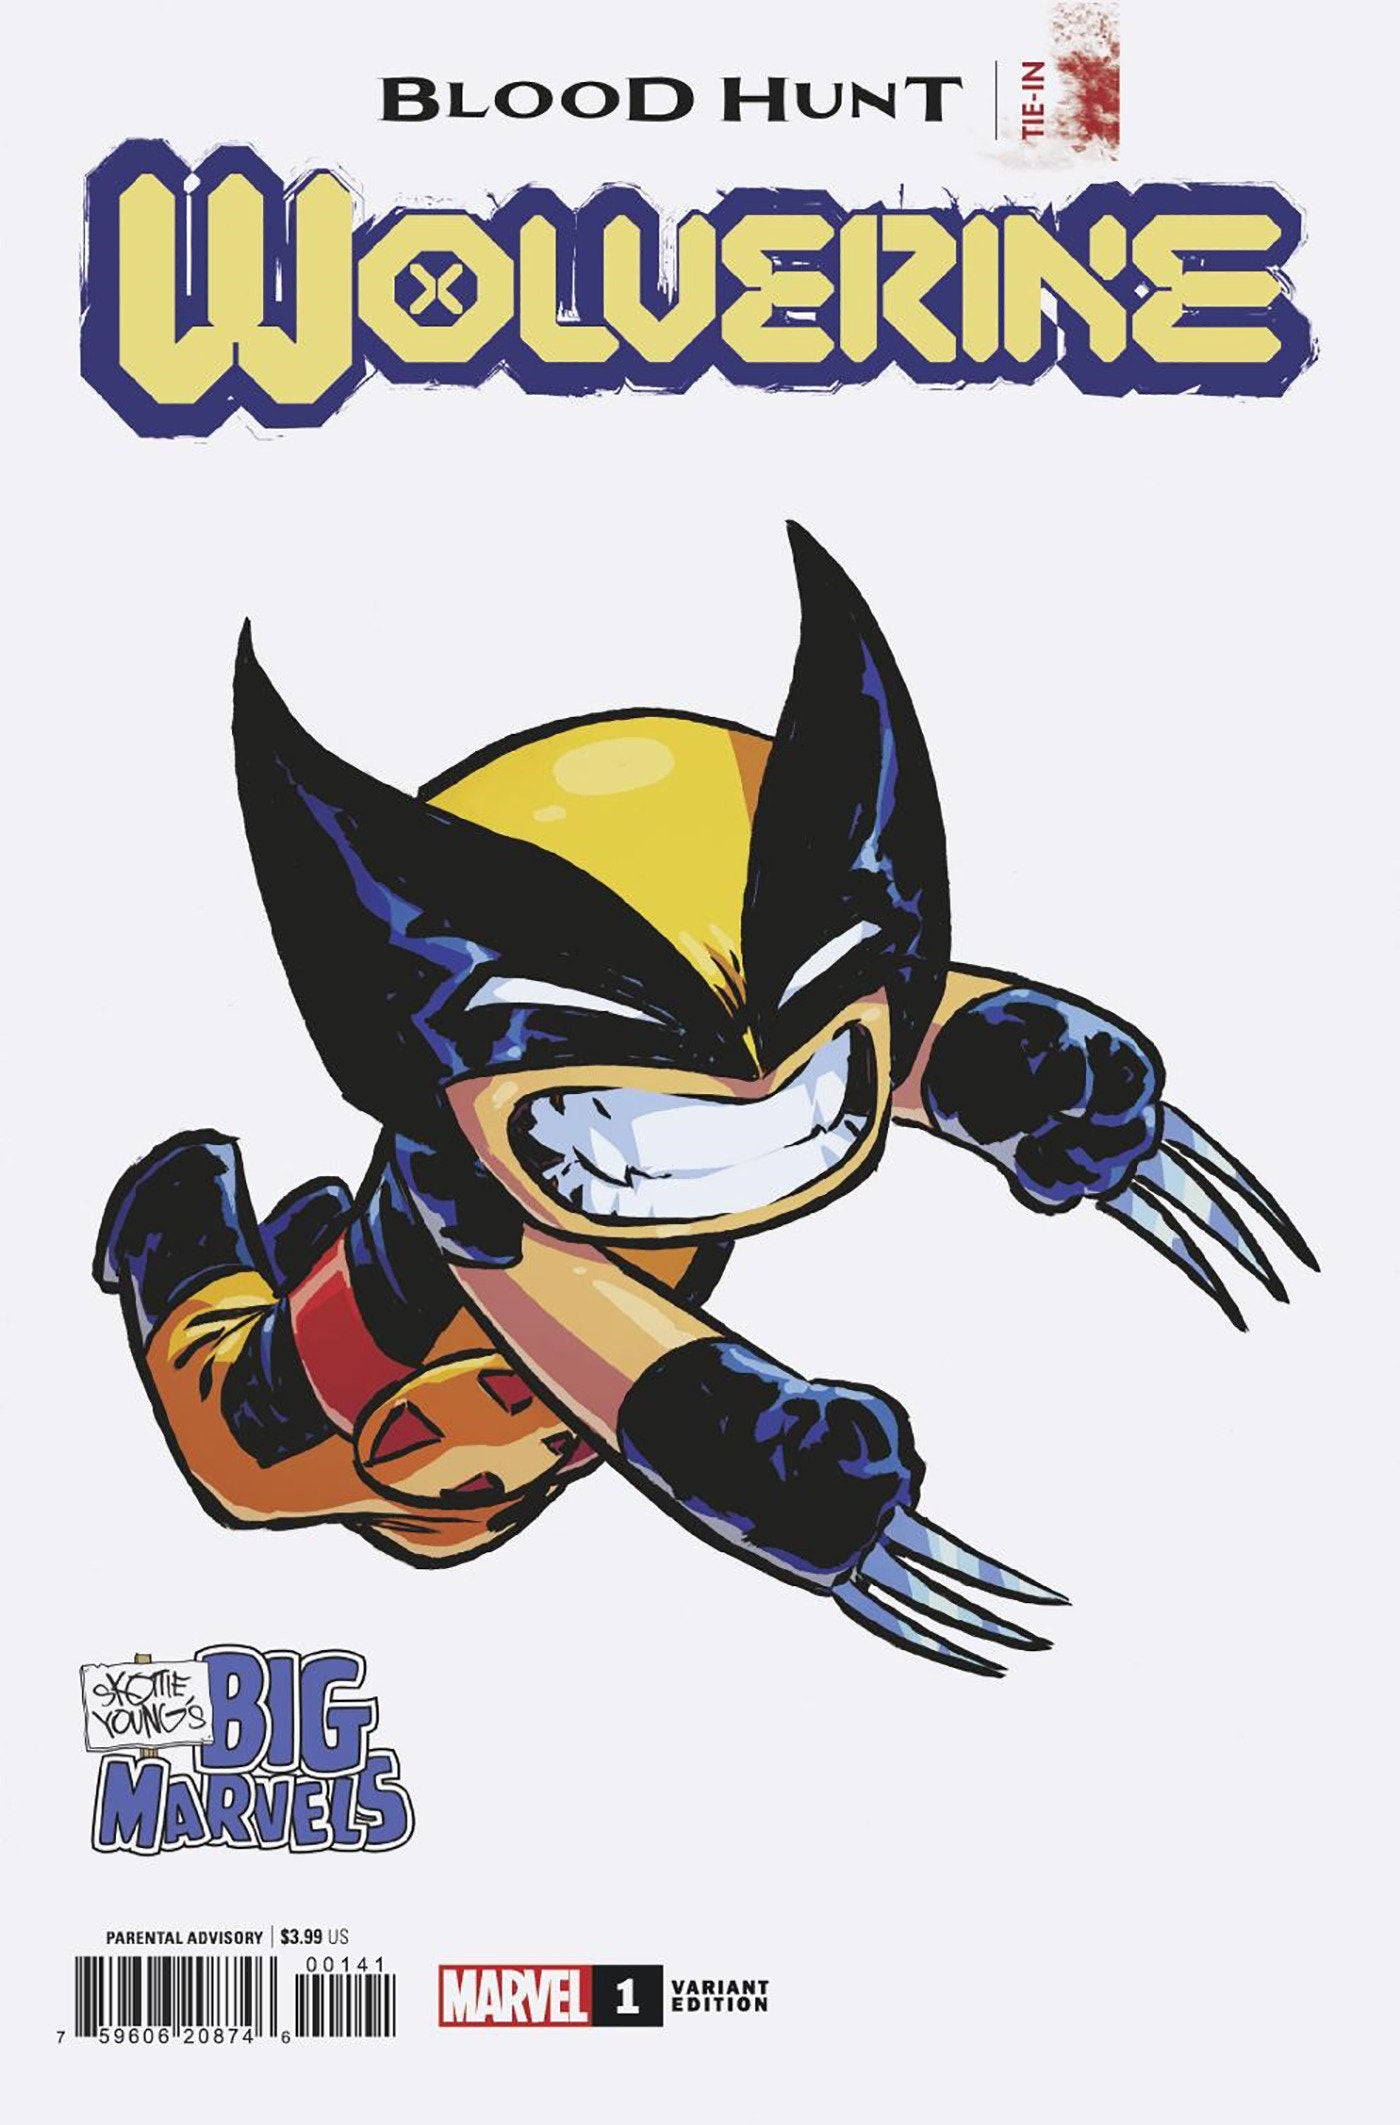 Wolverine: Blood Hunt #1 Skottie Young'S Big Marvel Variant [Bh] | Game Master's Emporium (The New GME)